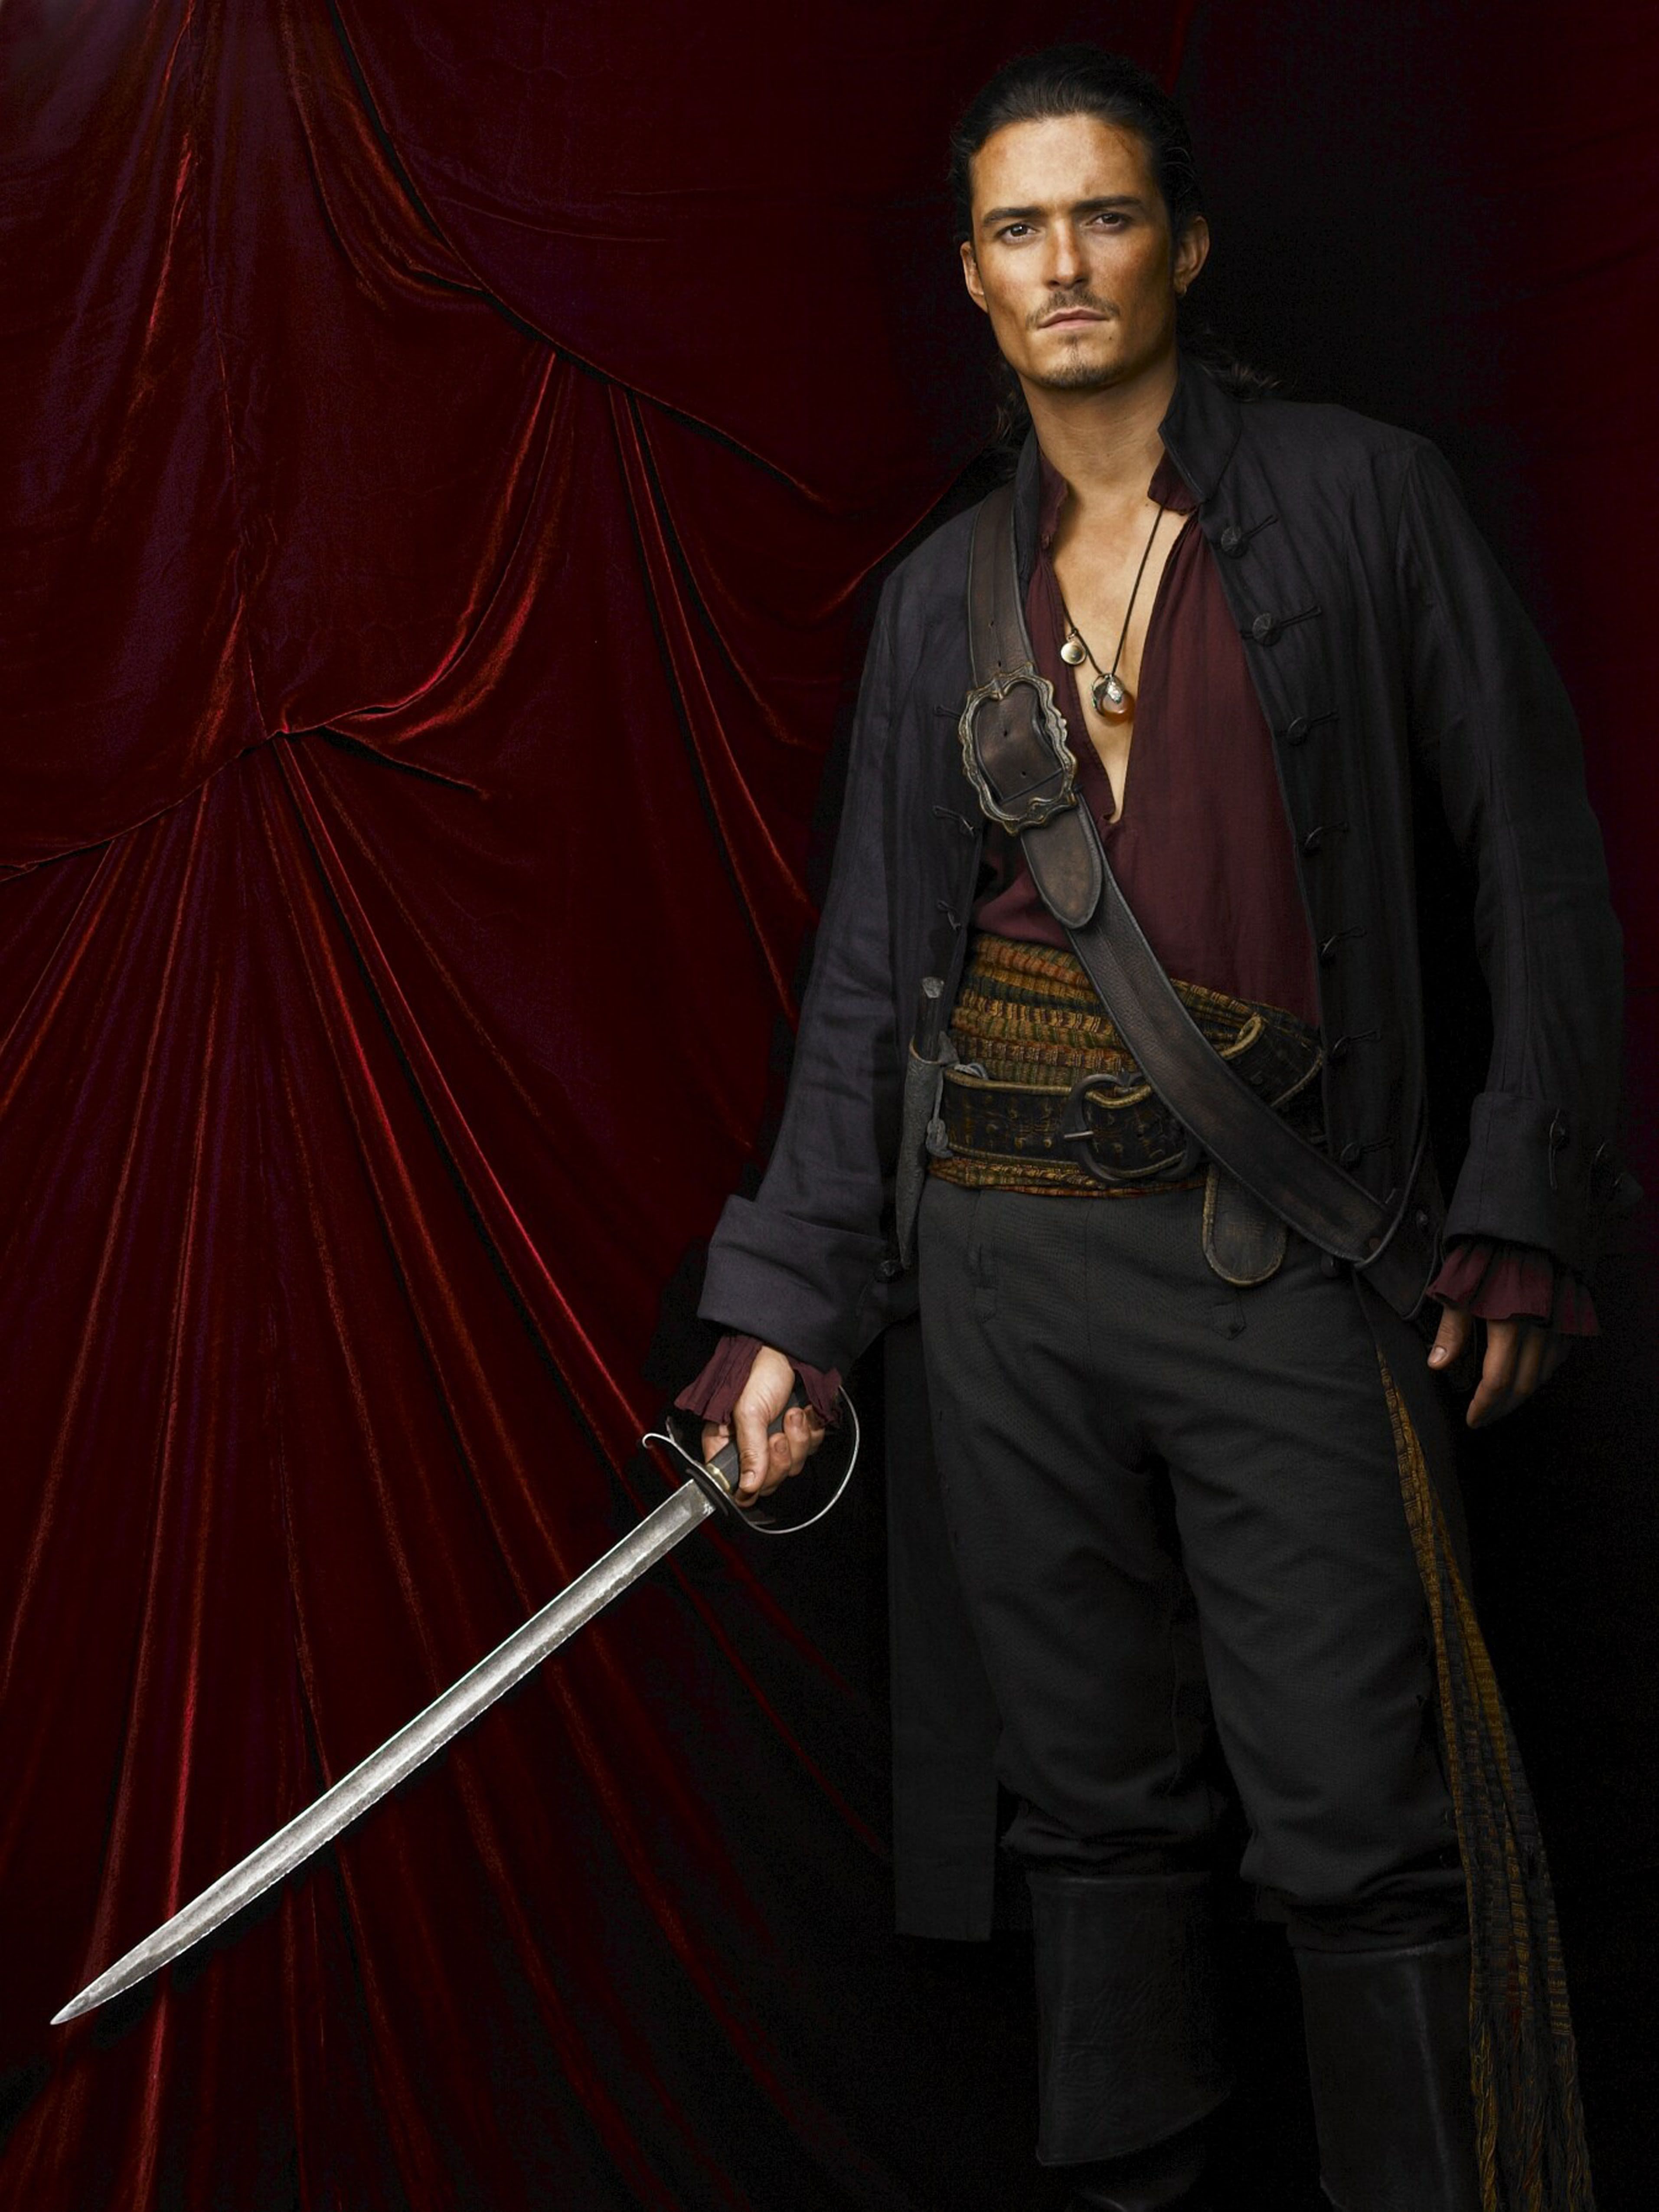 Will Turner impersonation cosplay costume, Orlando Bloom impersonation cosplay  costume | RPF Costume and Prop Maker Community